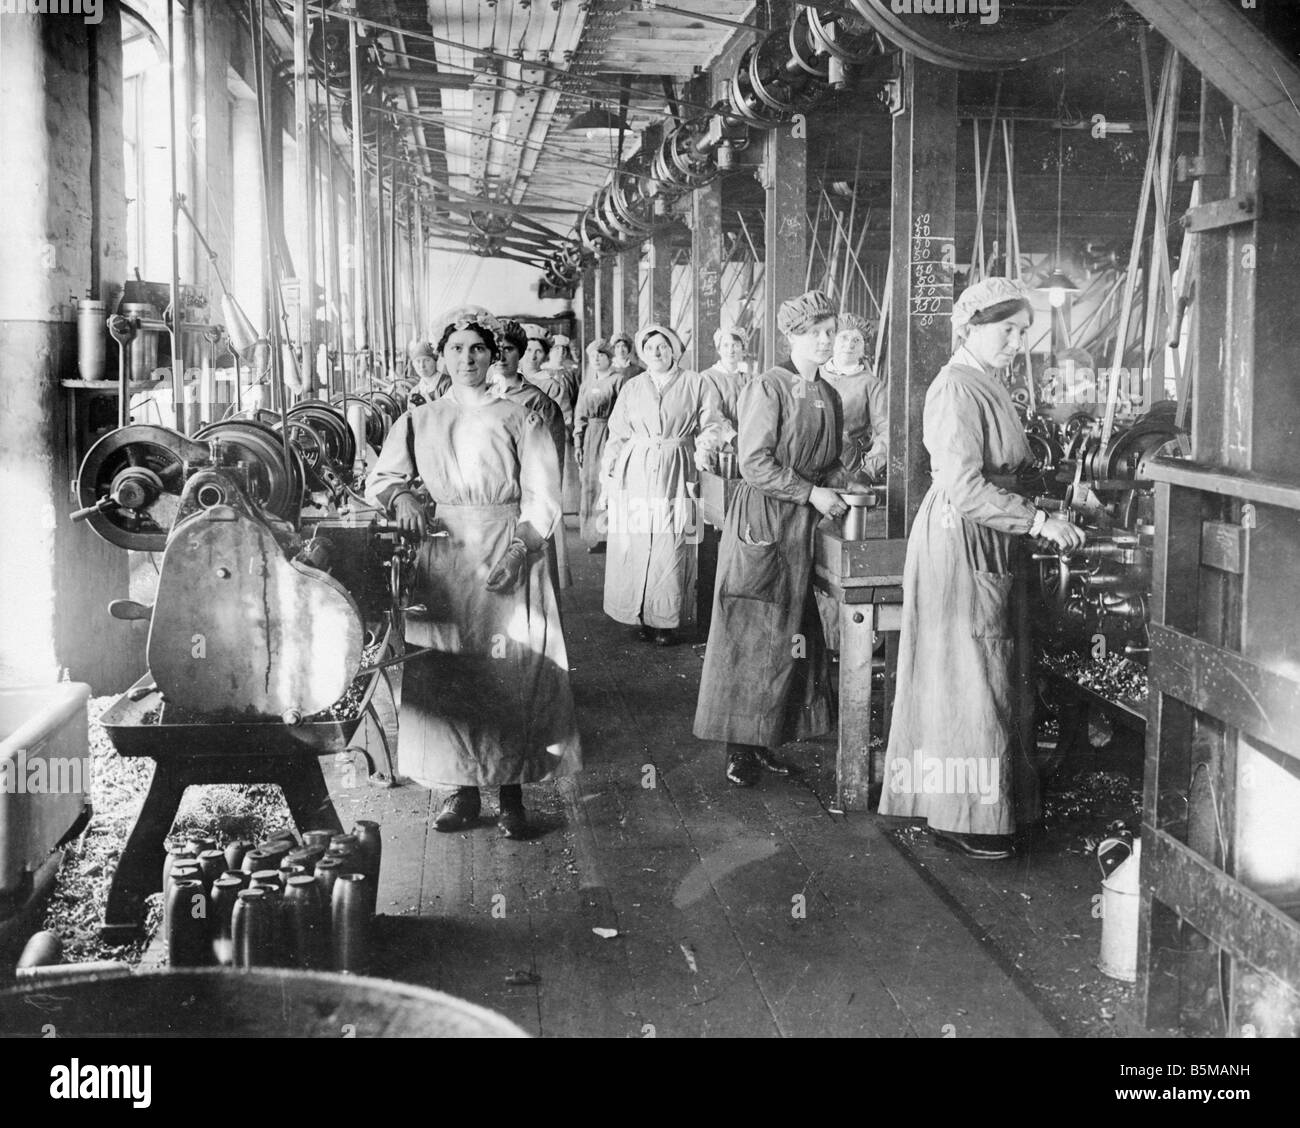 2 M146 R1 1917 1 Women making ammunition in Scotland 1917 Women at work Armaments industry Employment of British women in the ar Stock Photo